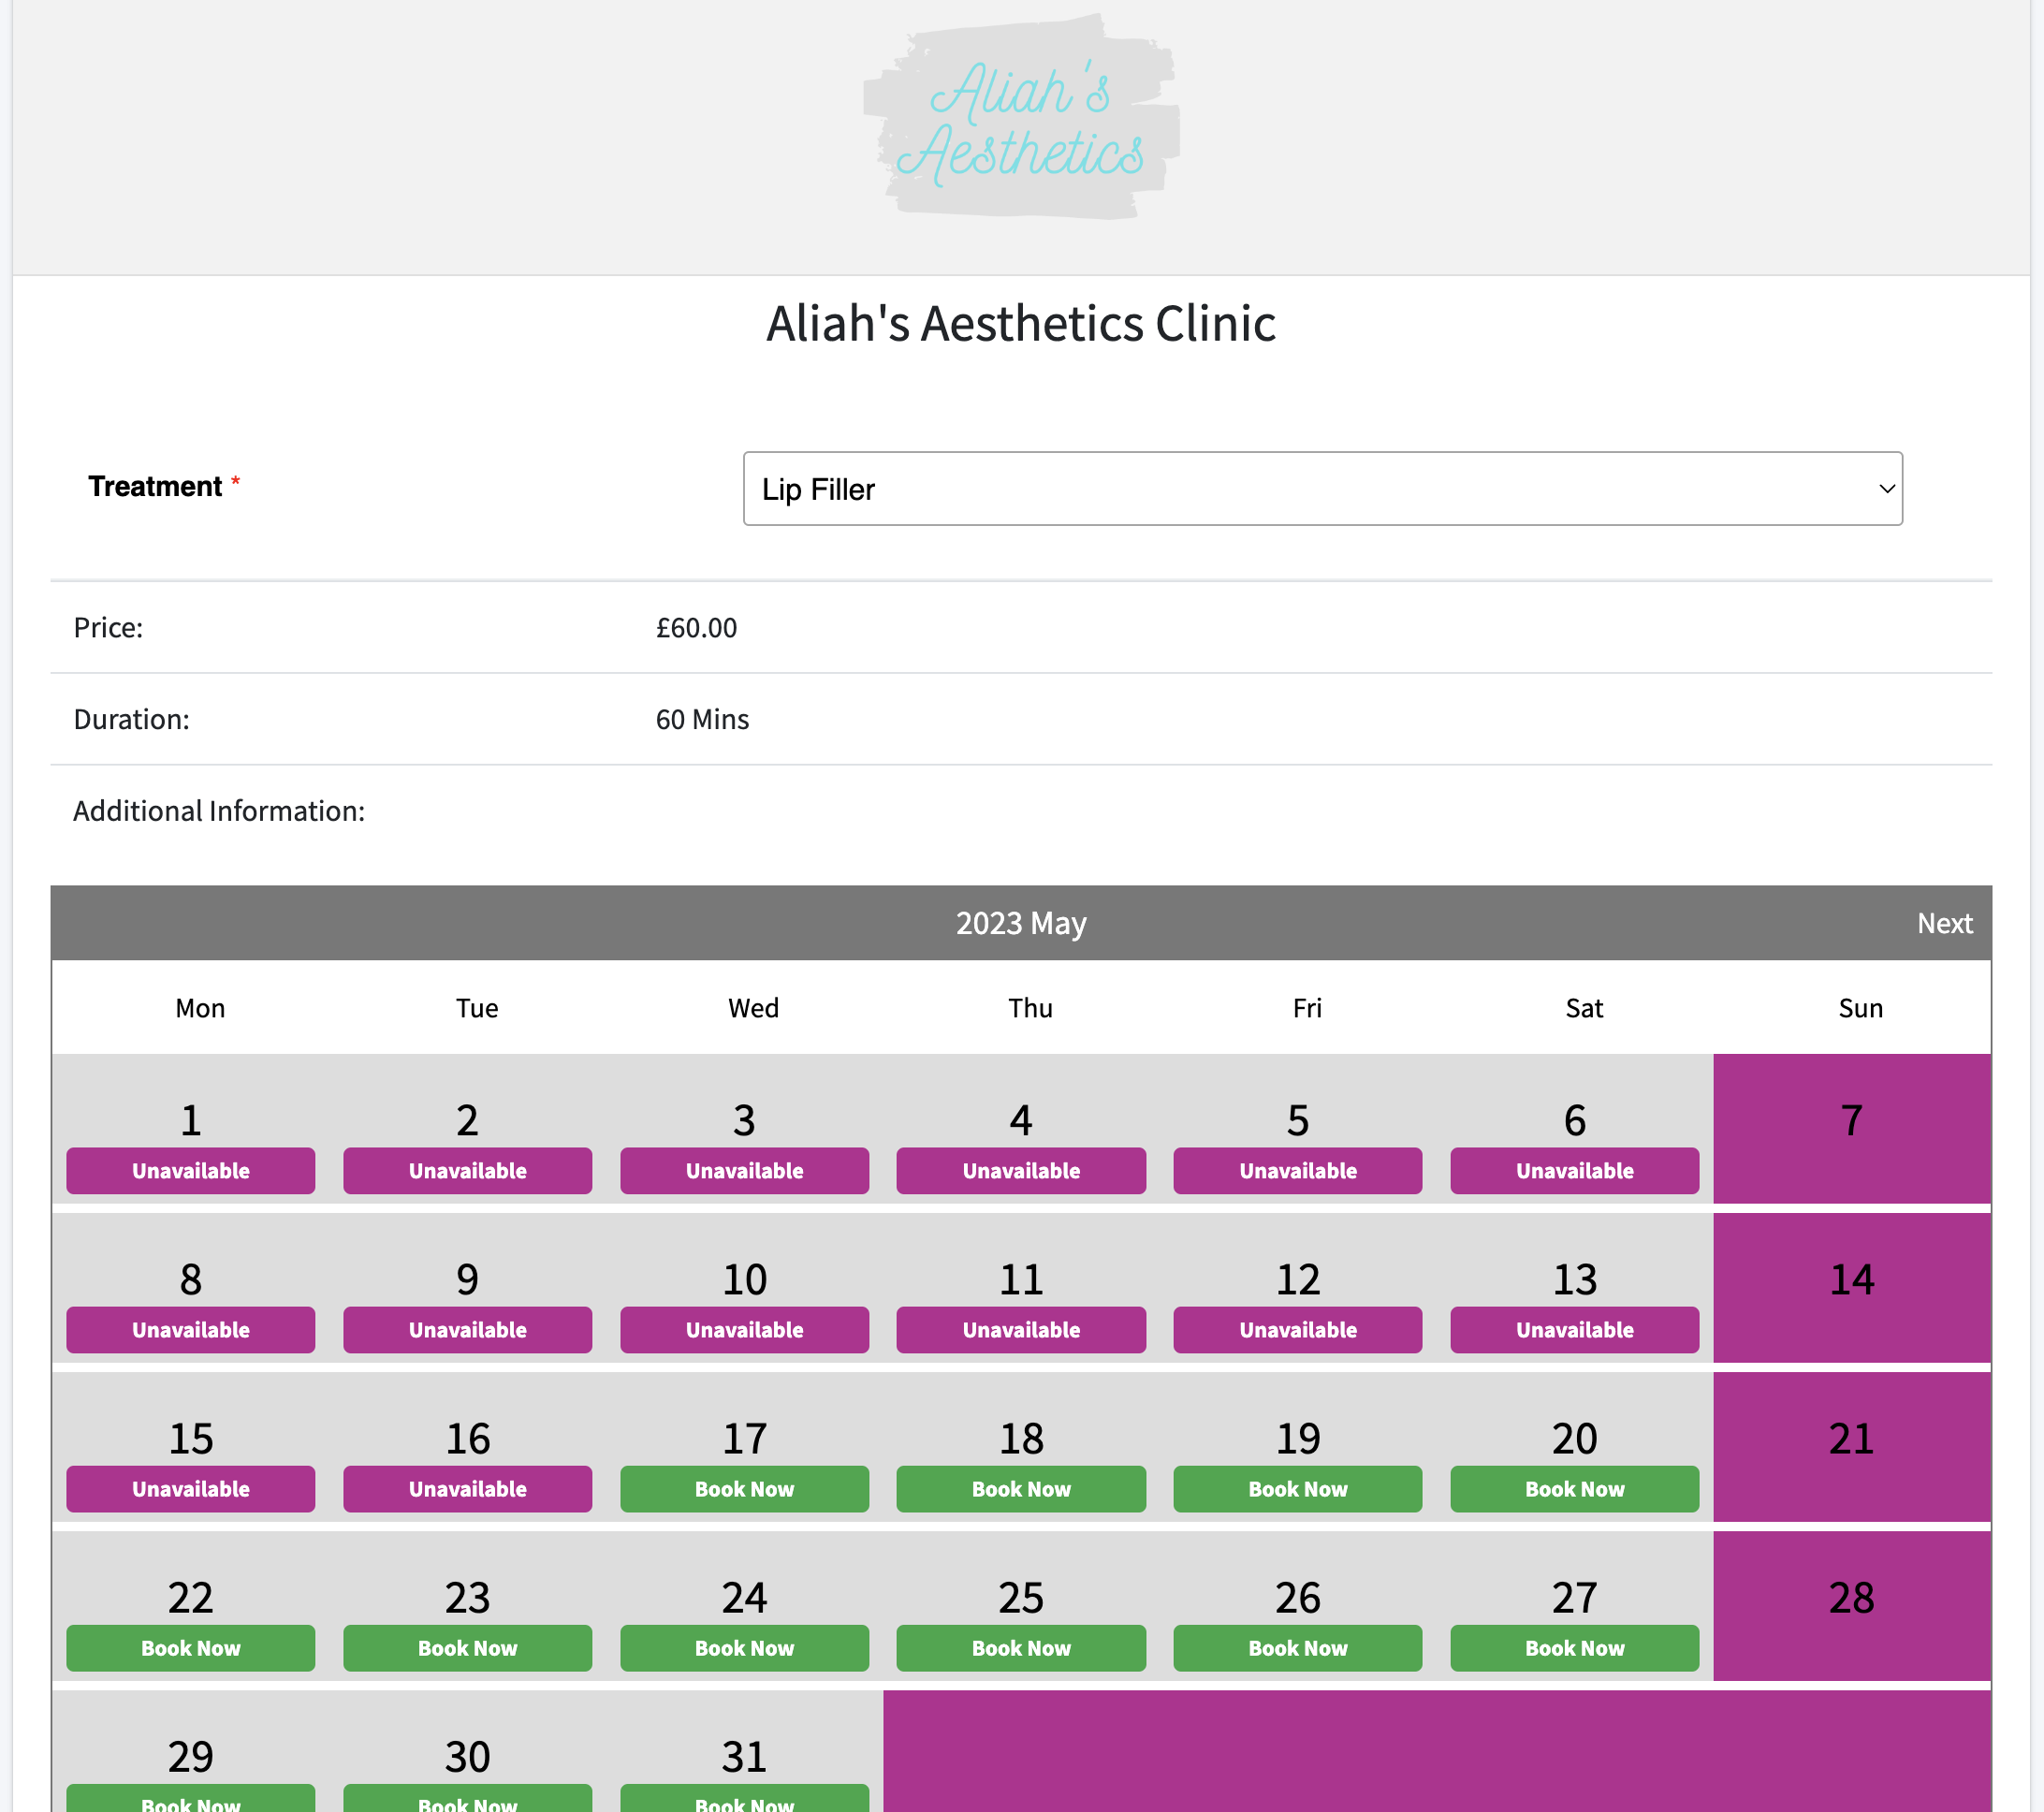 Bookings Calendar is accessible 24/7 and displays availability in real-time. Automatically include your consent forms in the booking confirmation email. Automatic Email and SMS Appointment Reminders to reduce no-shows.